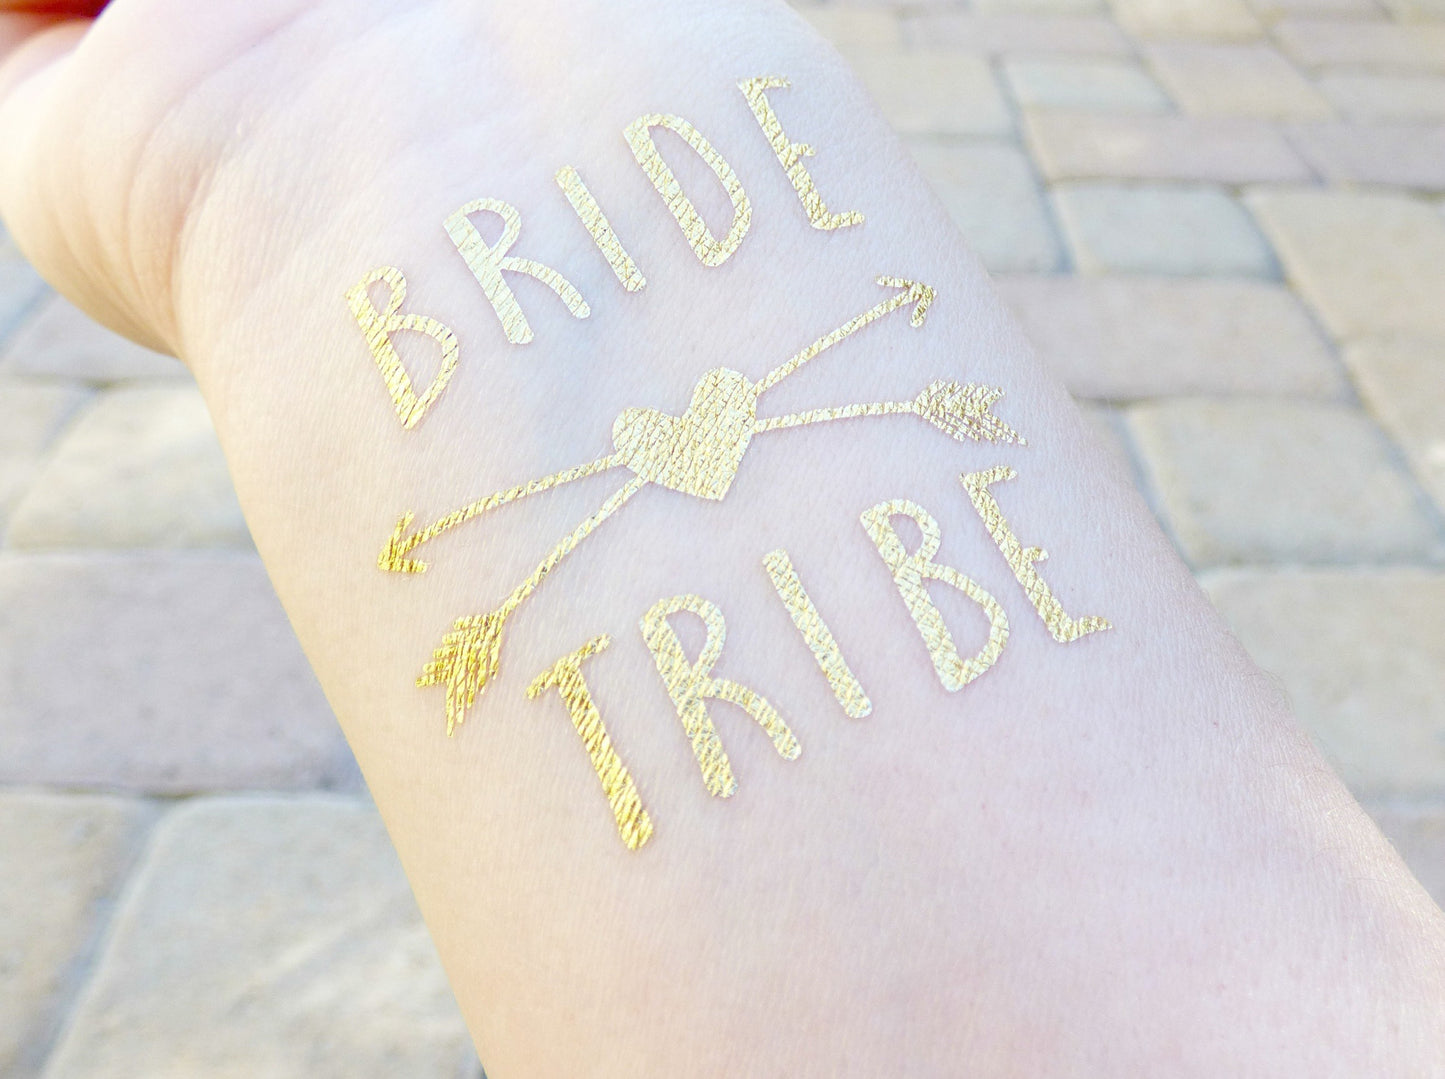 Bride Tribe temporary tattoo with heart and arrows for bachelorette party